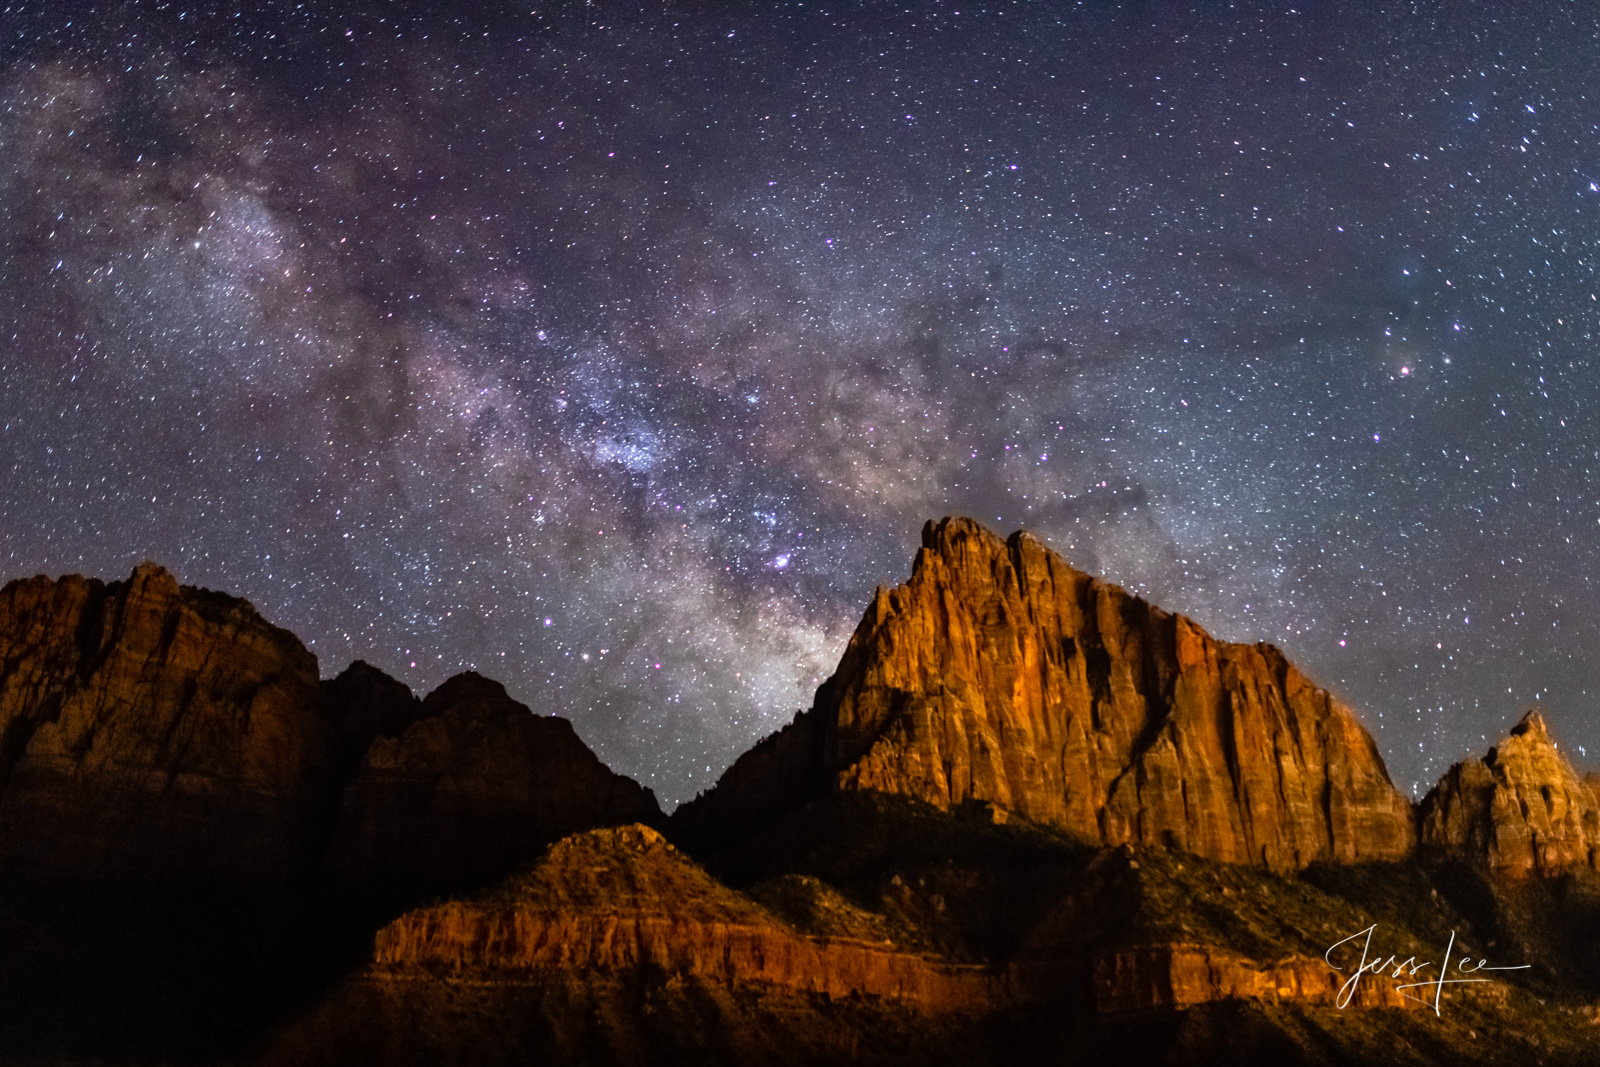 Zion National Park Evening Wallpapers